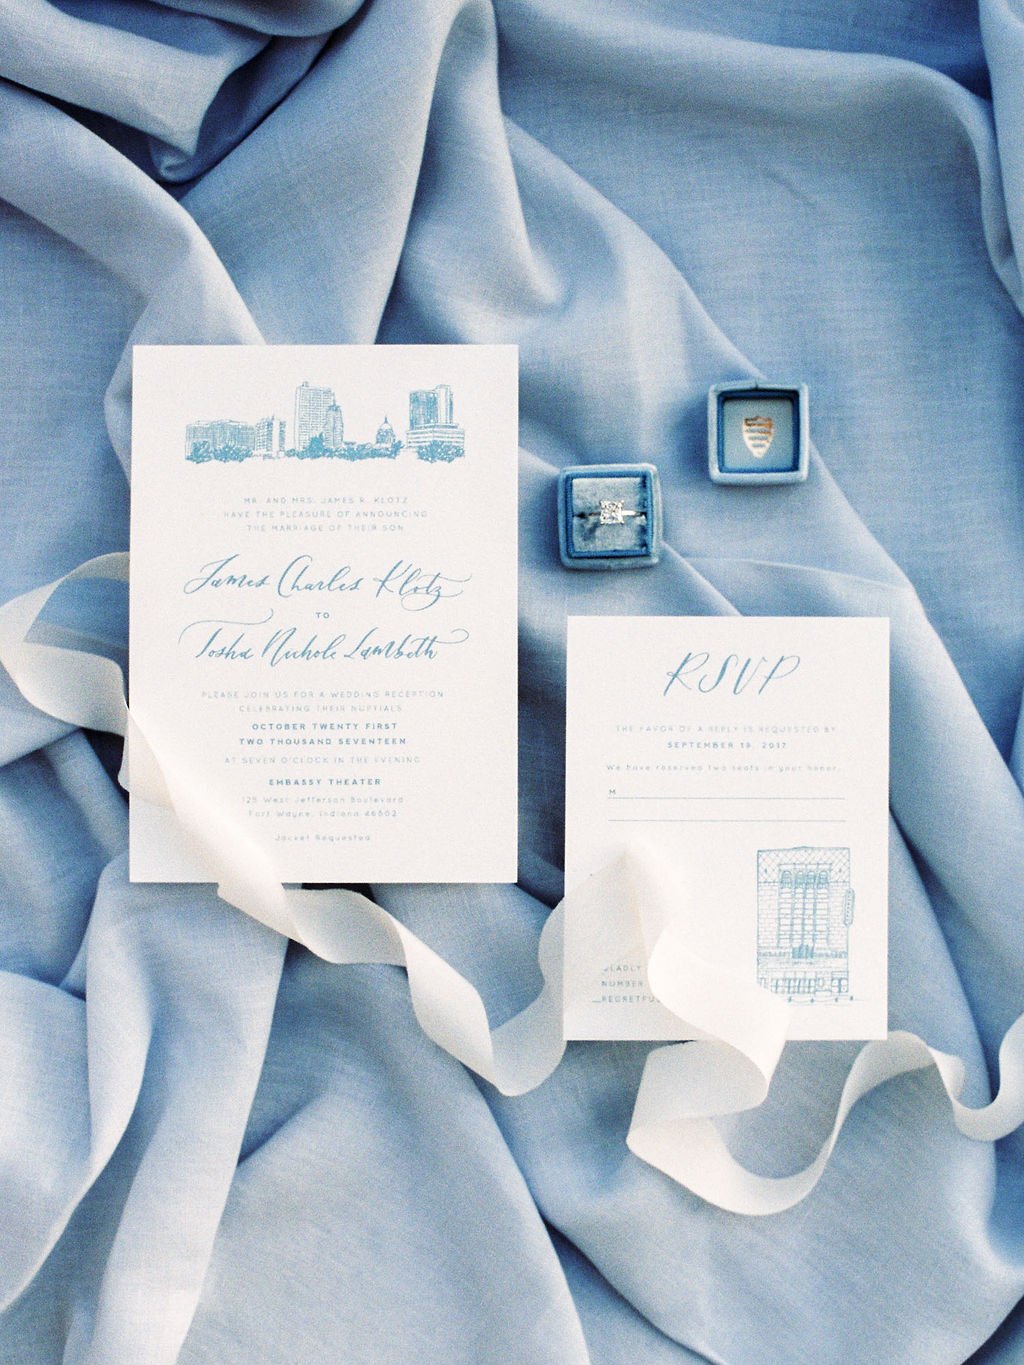 Flat lay with wedding invitation and RSVP with a blue background and white ribbon